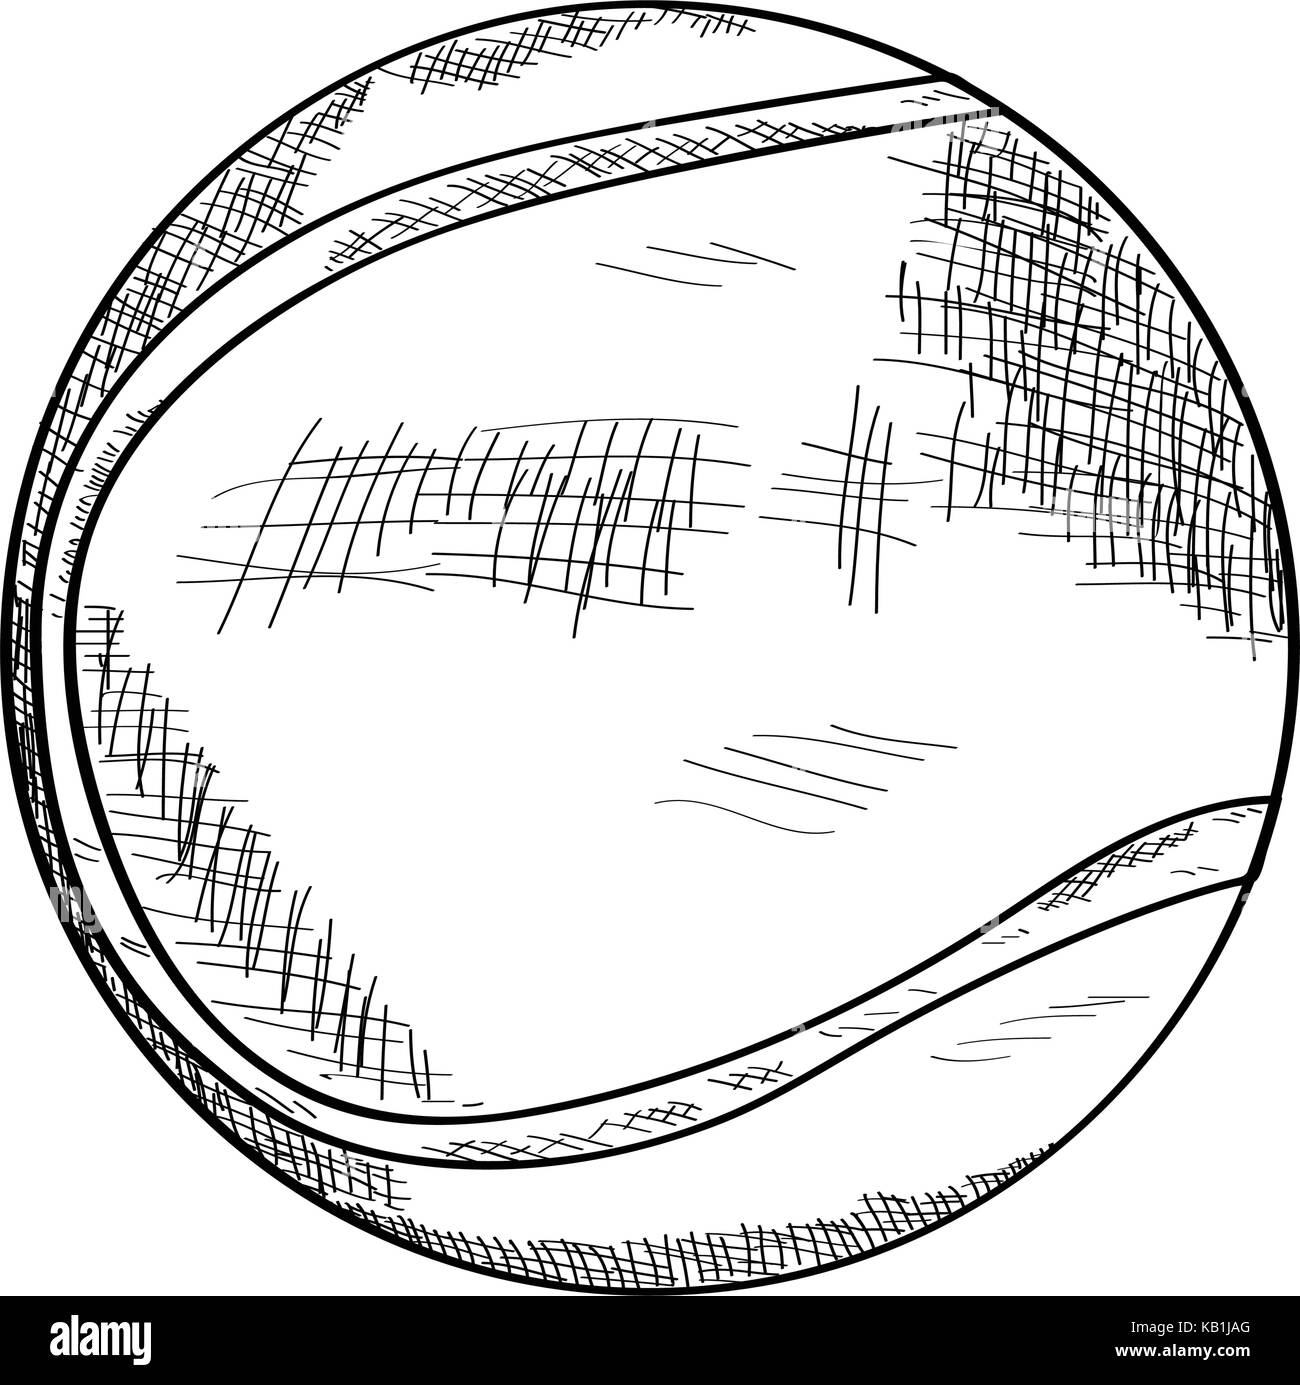 Tennis Ball Drawing - Tennis Ball Drawing High Res Vector Graphic Getty